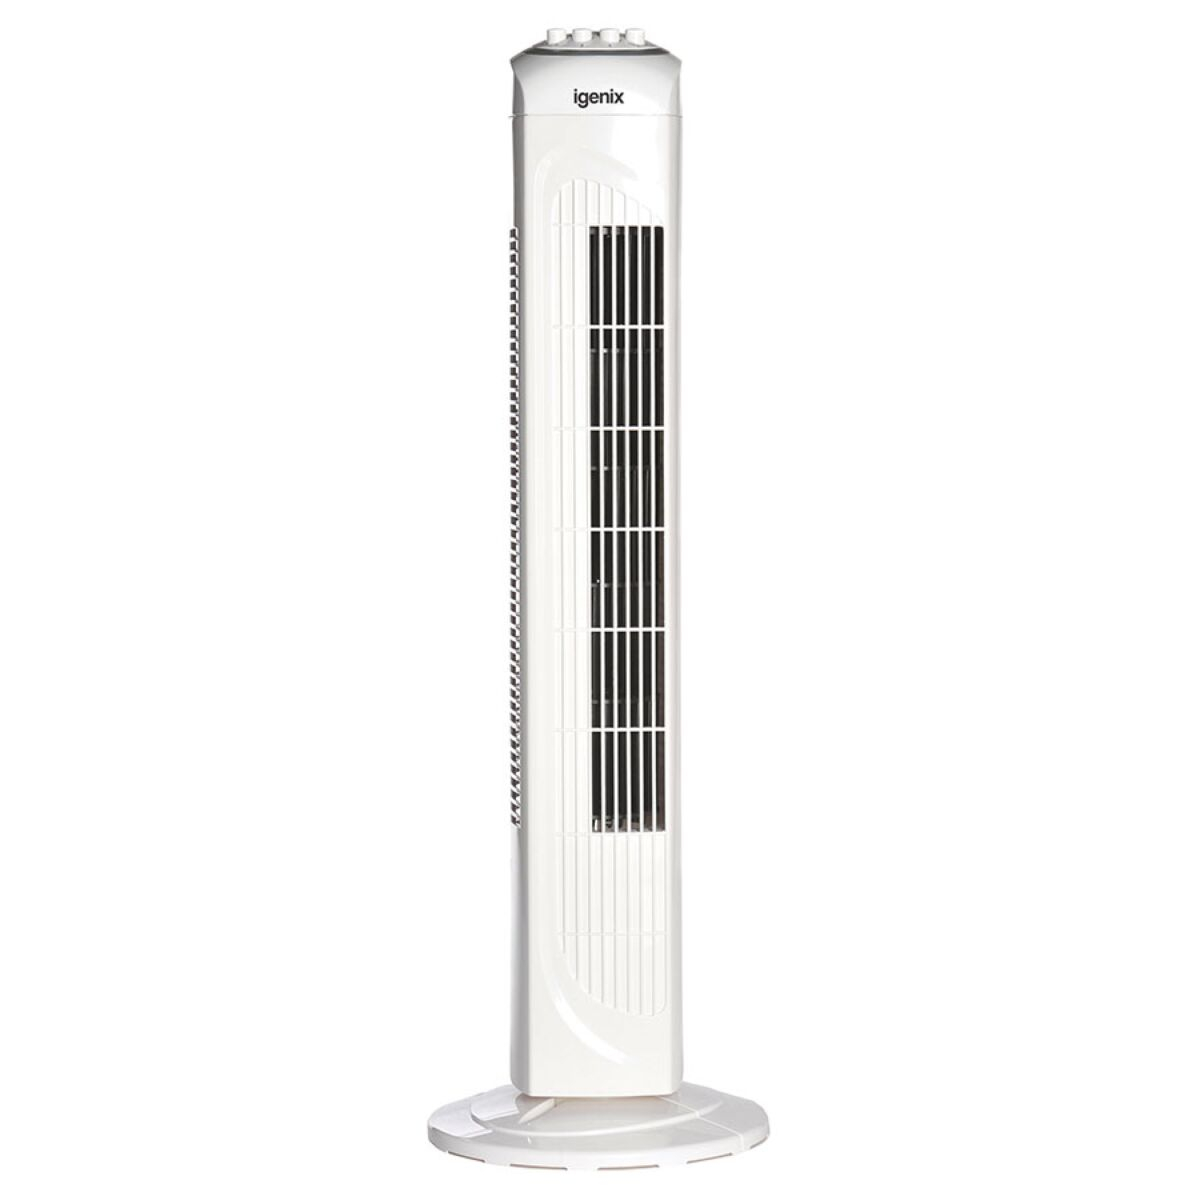 Igenix Df0030 30 Inch Tower Fan With 2hr Timer White for dimensions 1200 X 1200